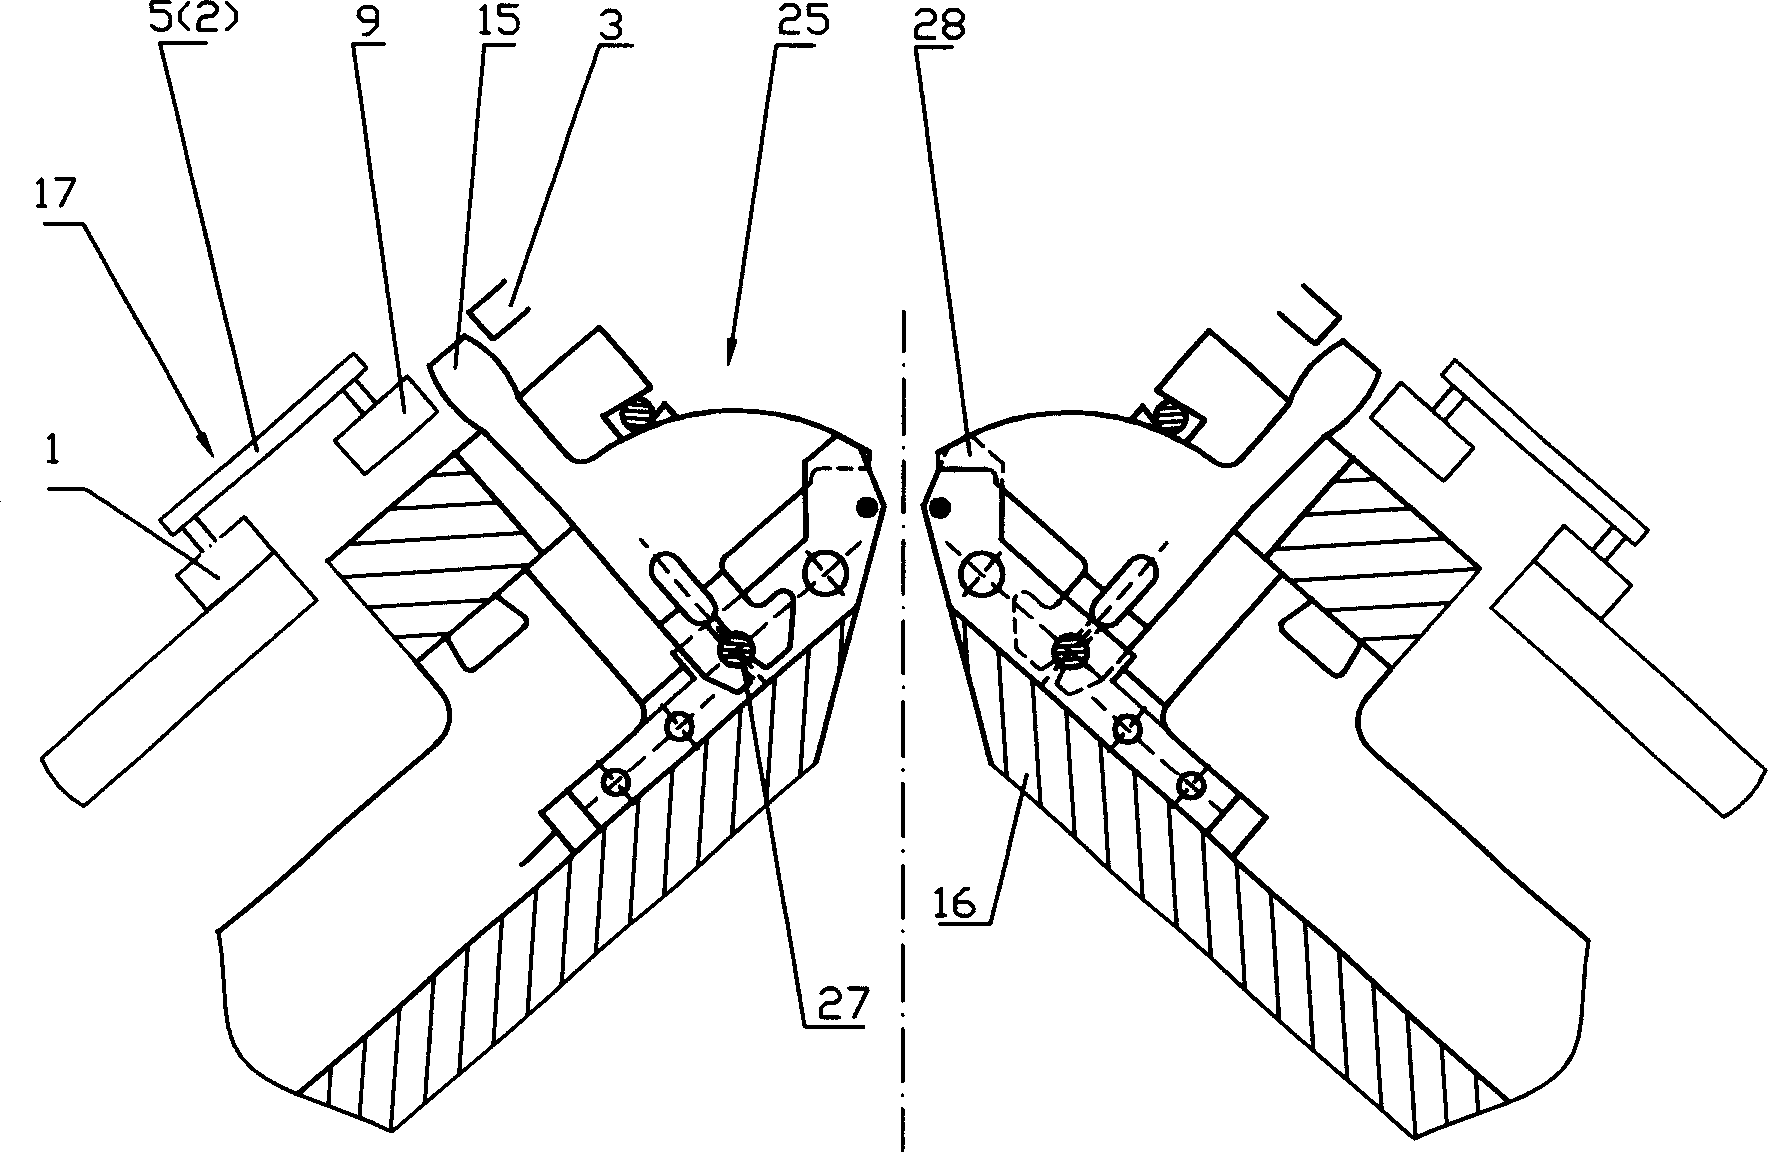 Sinker control device for straight-bar machines